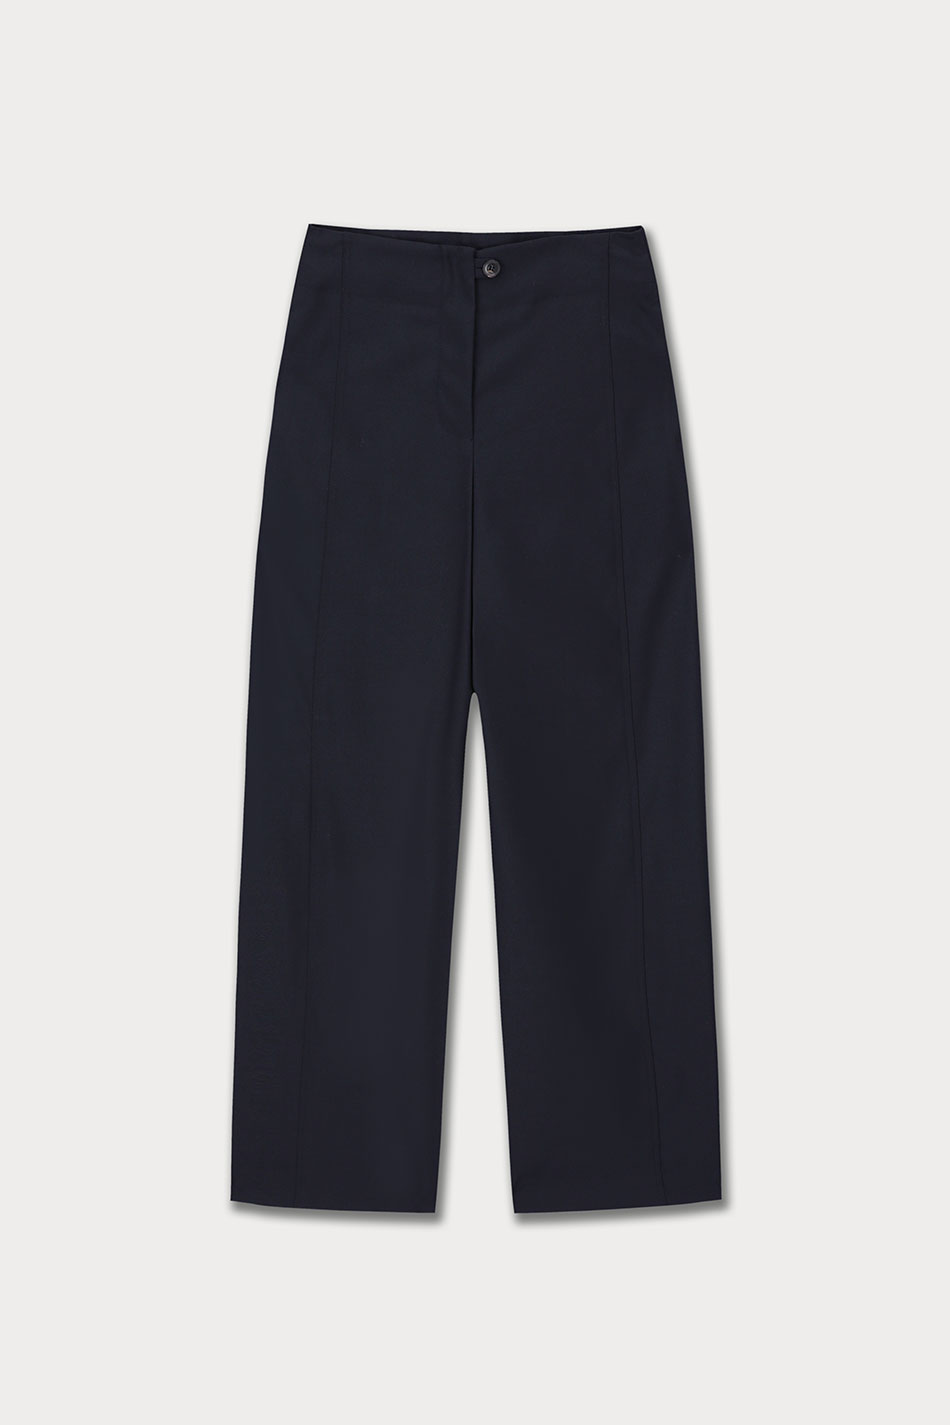 3rd / Arch Wool Pants (Navy)